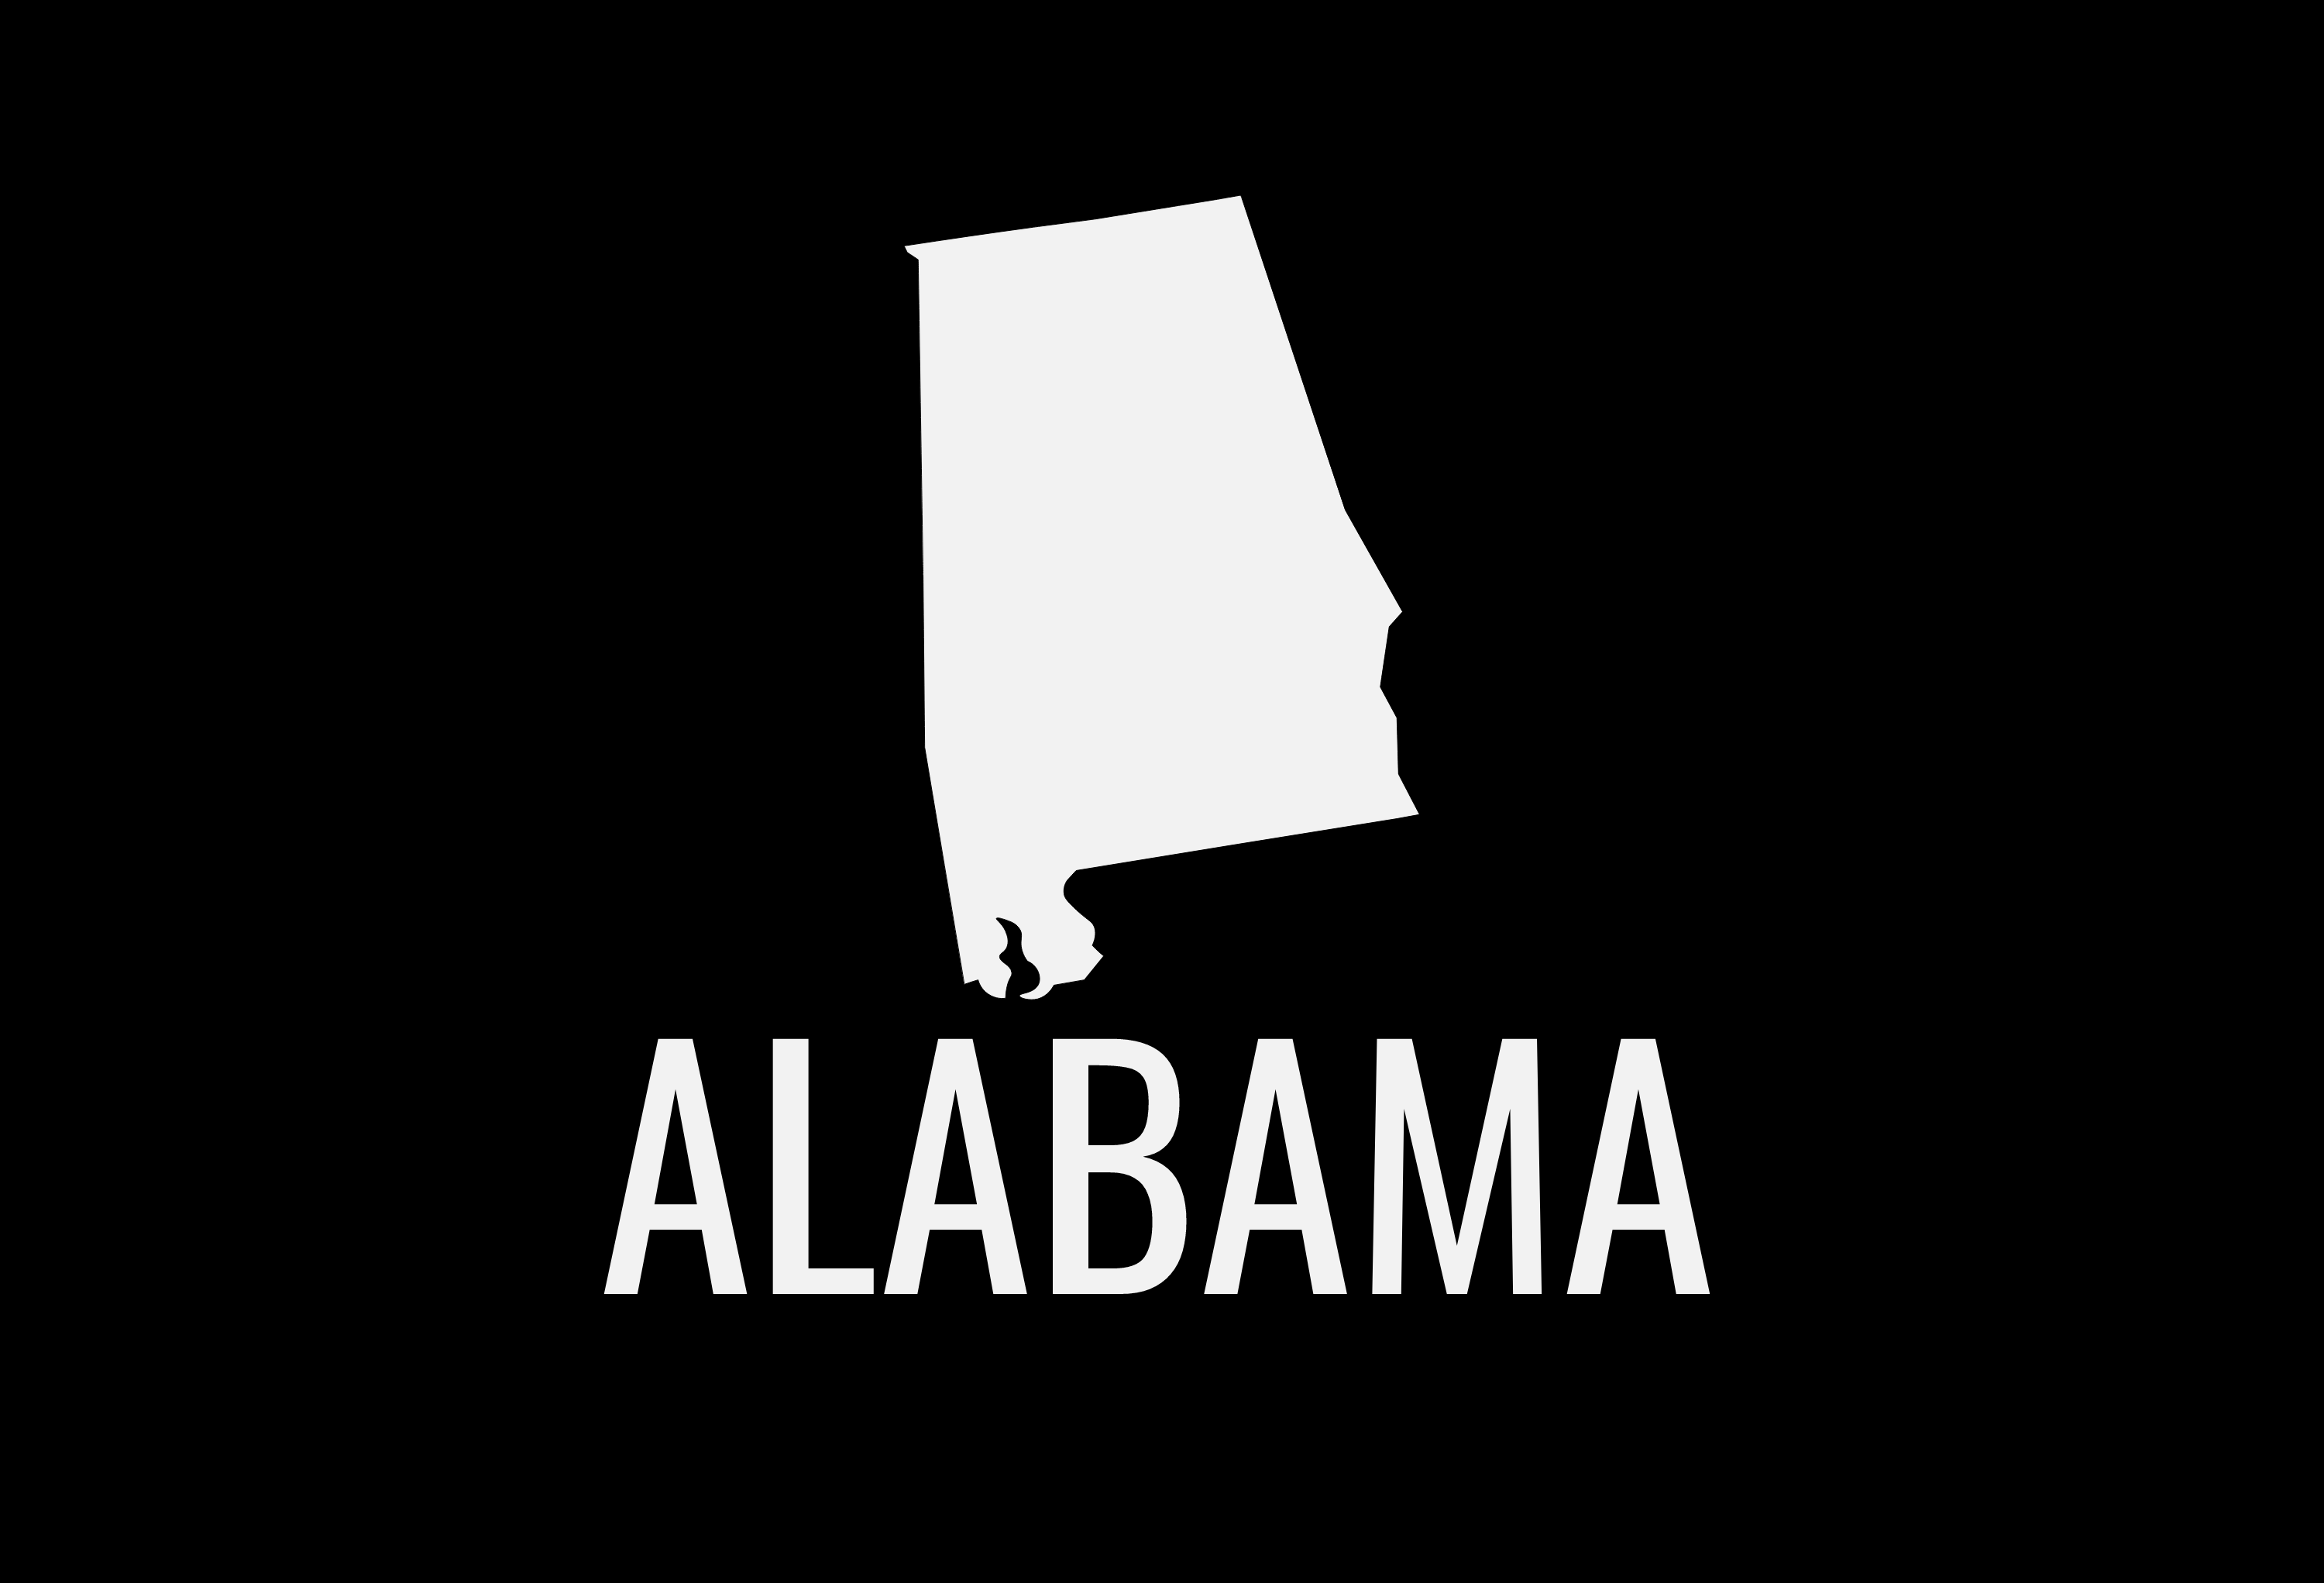 Alabama State Map Car Decal - Permanent Vinyl Sticker for Cars, Vehicle, Doors, Windows, Laptop, and more!